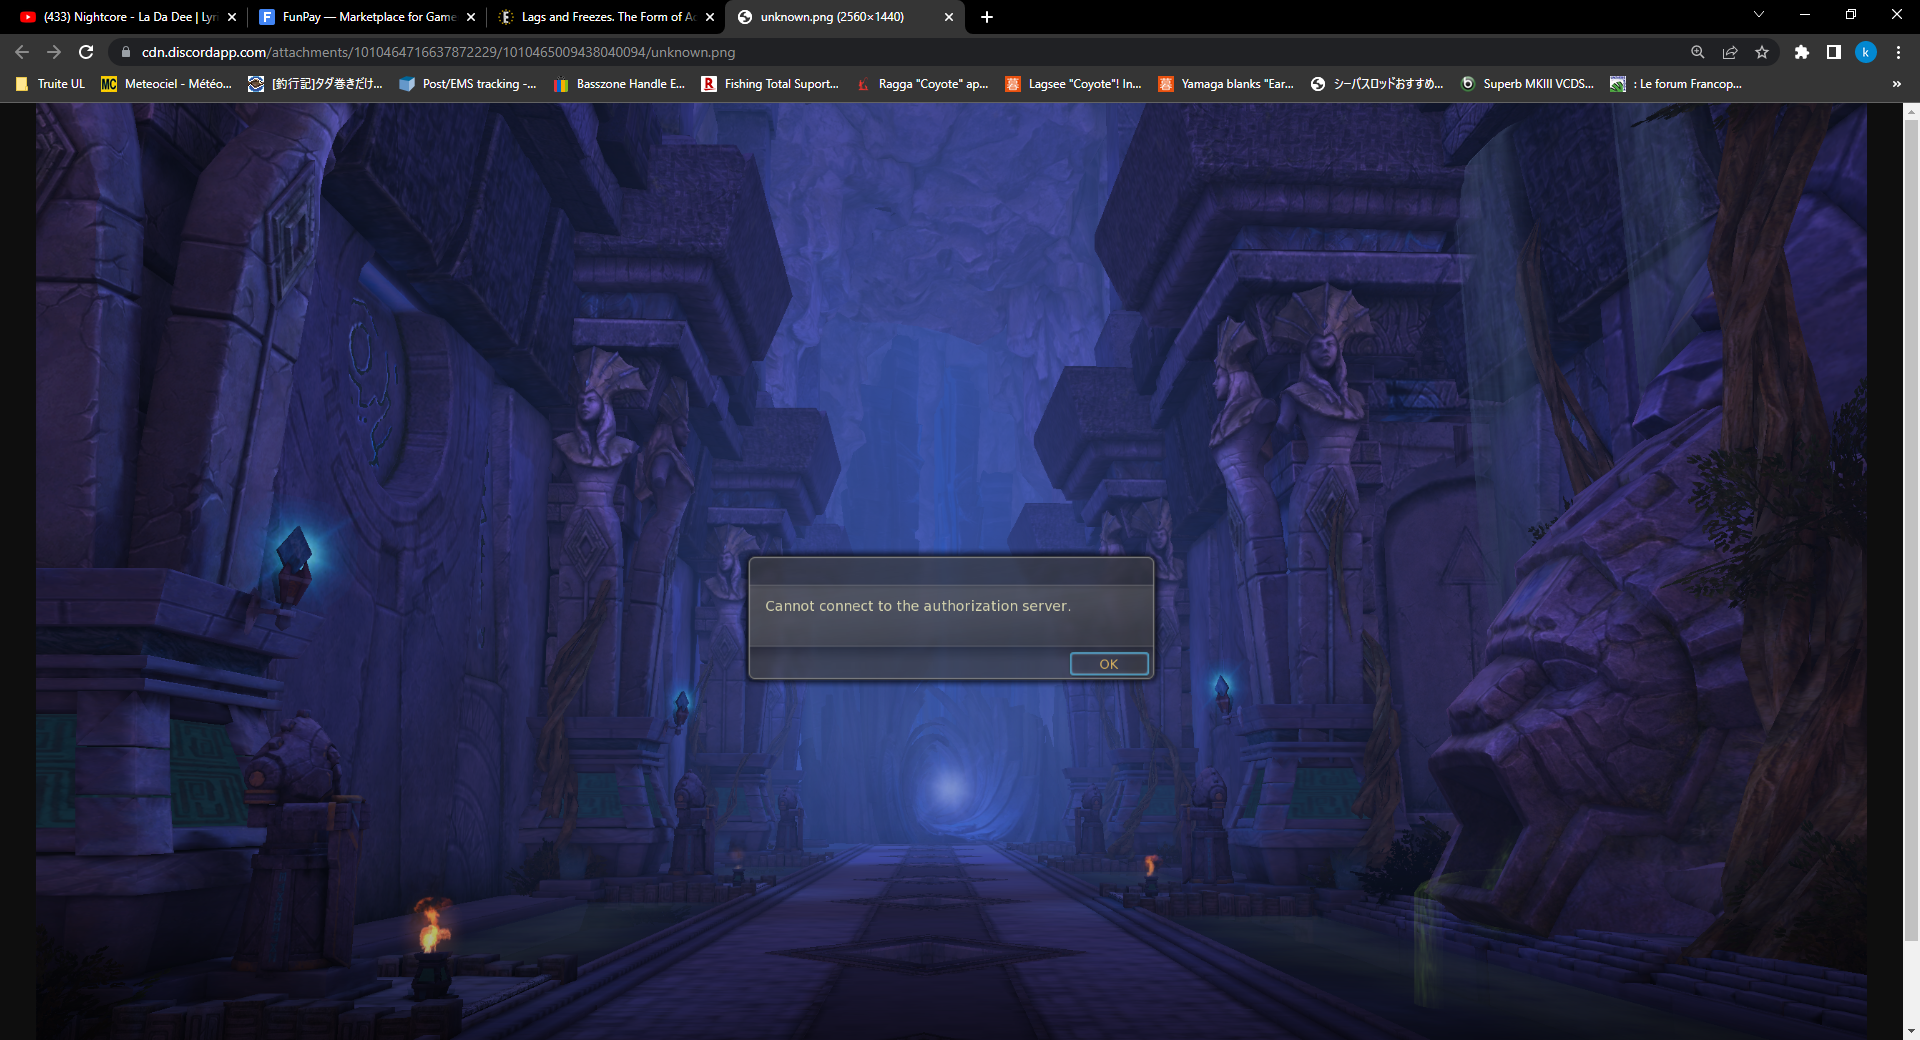 Lags and Freezes. The Form of Address to Administration. - PROBLEMS IN GAME - Perfect private server of Aion - EuroAion.com